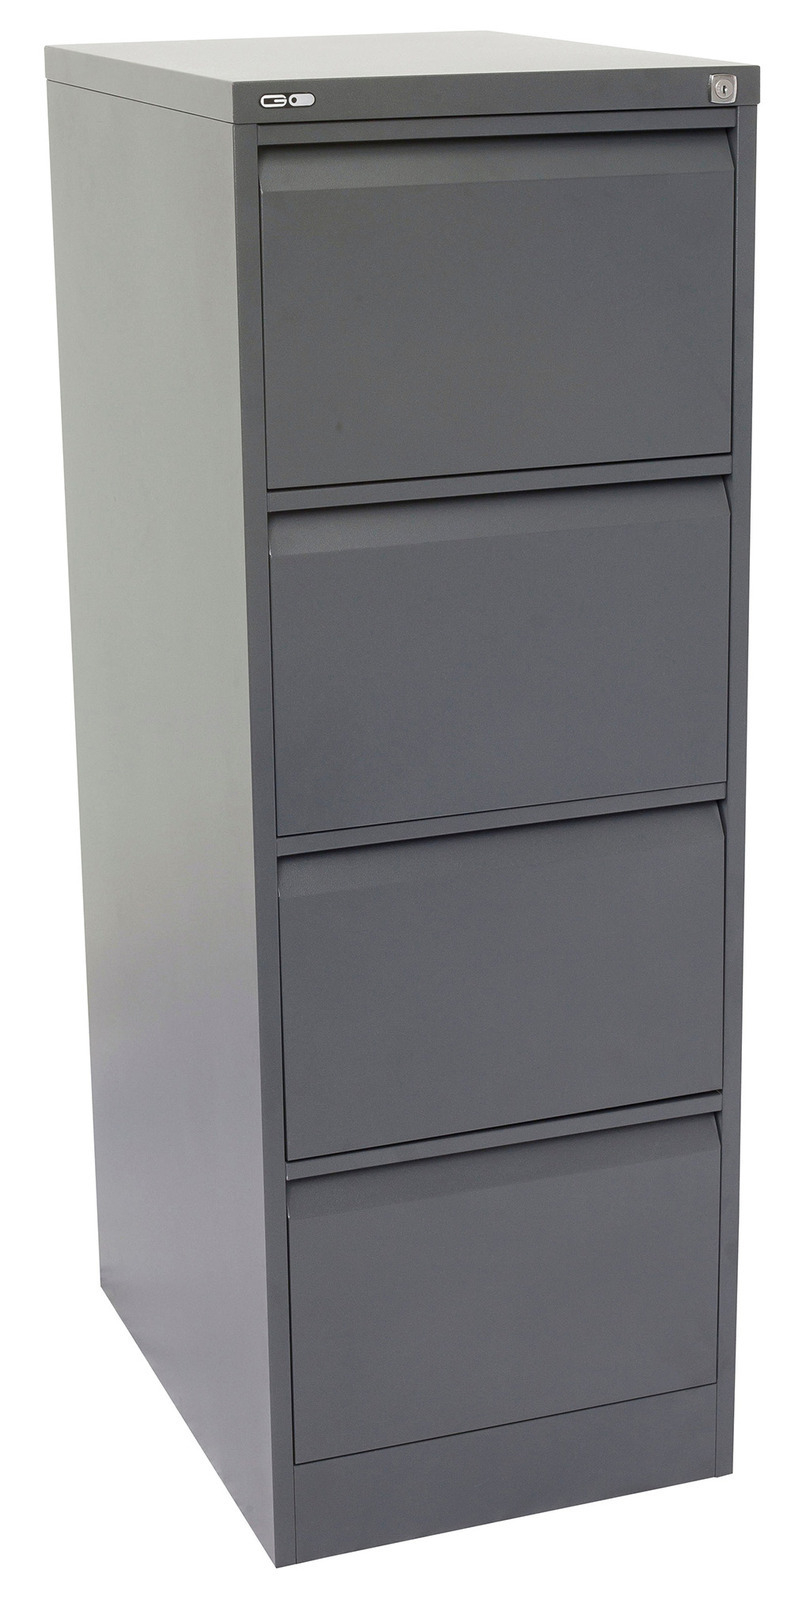 Go Steel Graphite Filing Cabinet 4 Drawer intended for size 791 X 1600